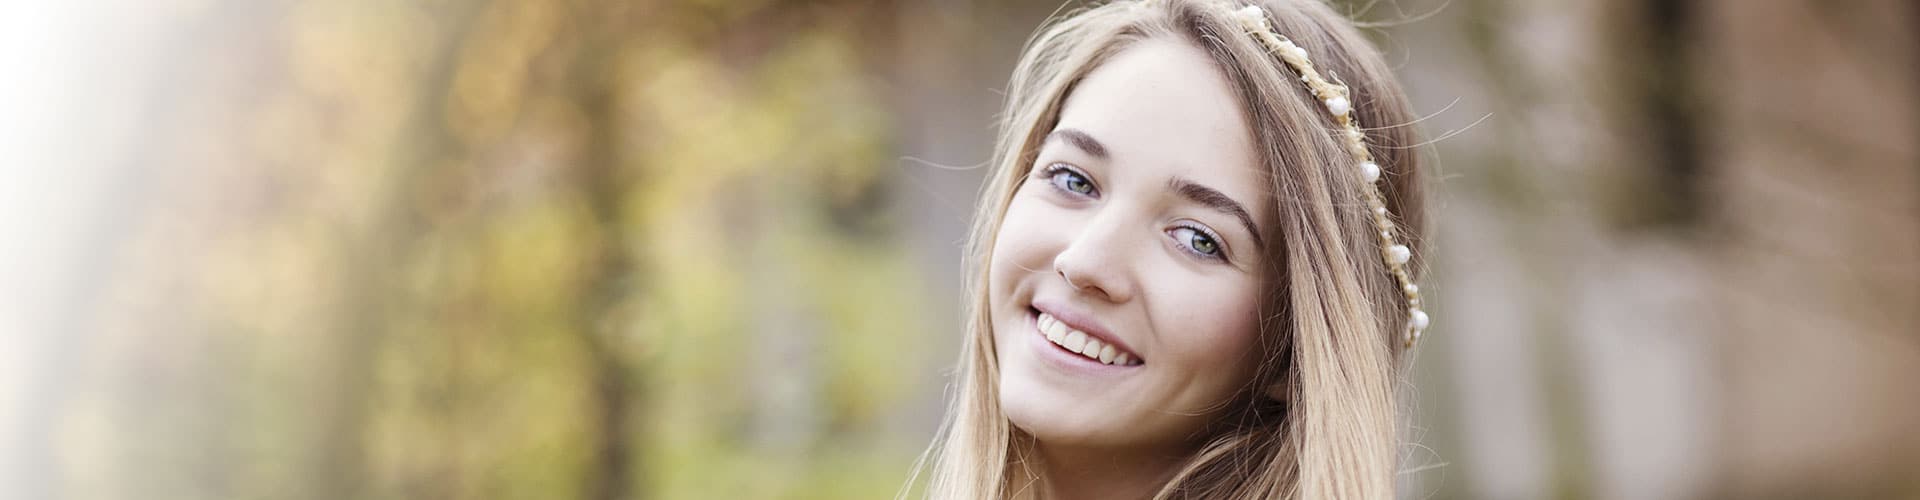 Invisalign Teen Orthodontic Specialists of St. Louis Creve Coeur St. Louis MO